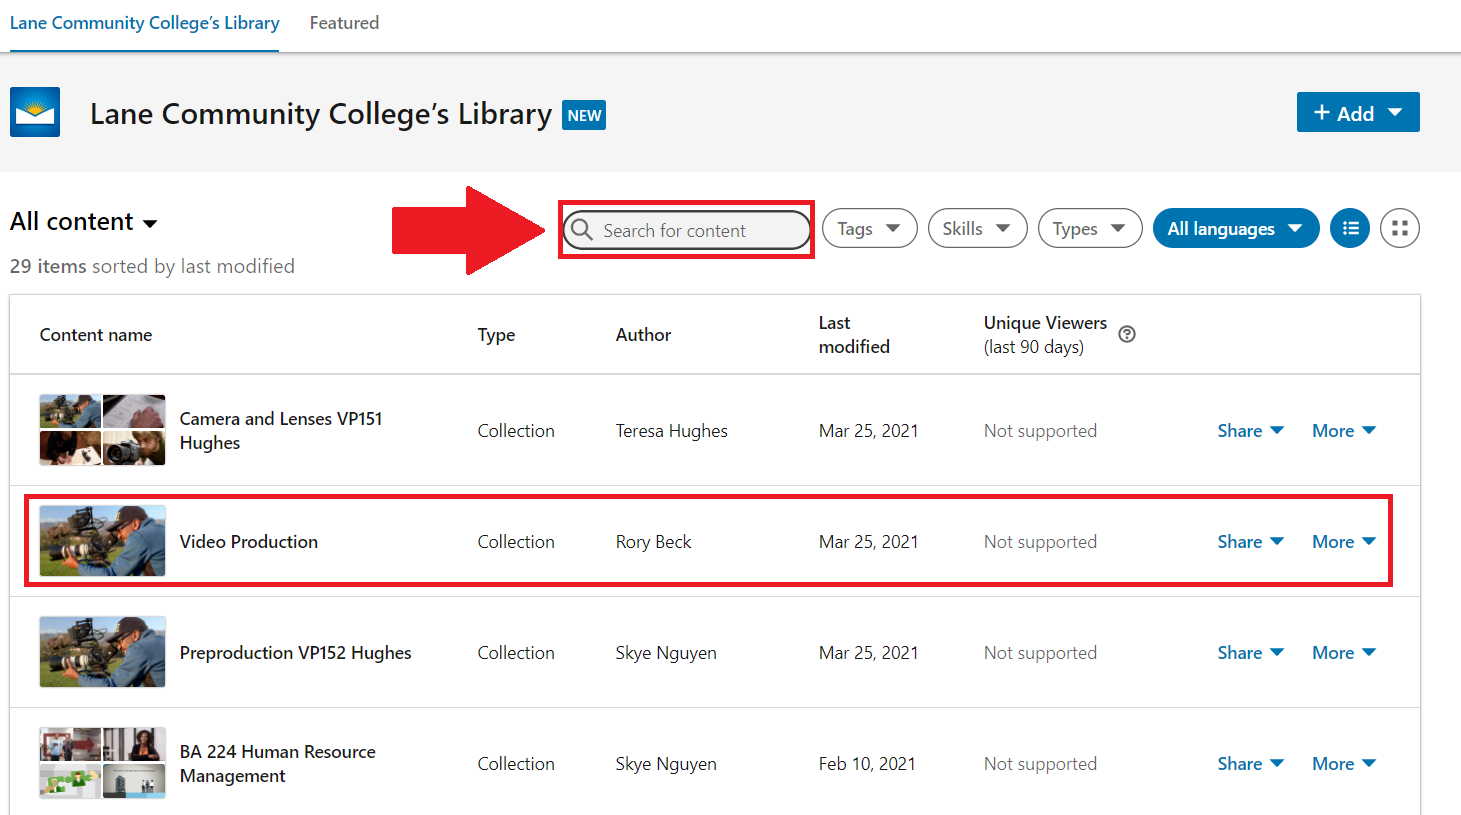 lane community college's library window with search for content text field highlighted